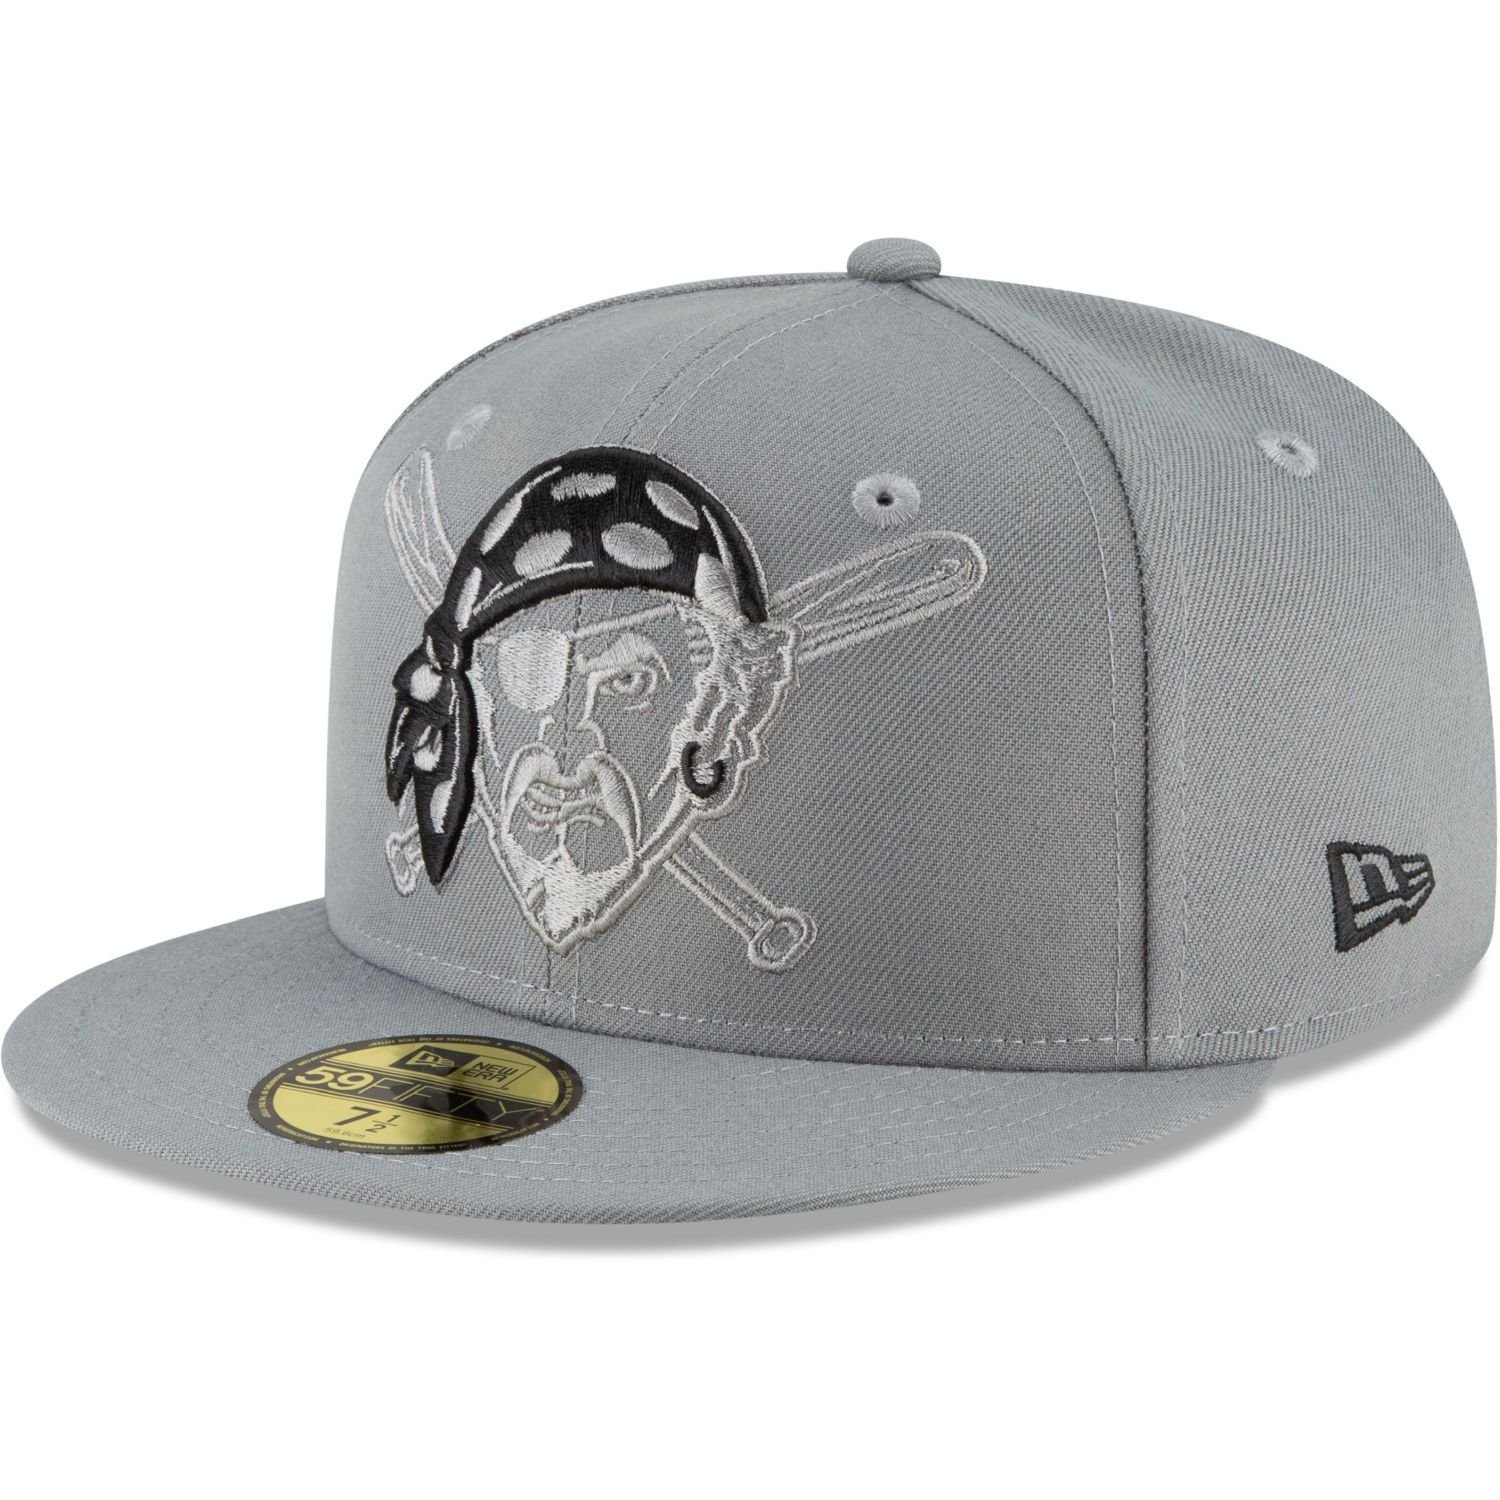 GREY Fitted Era Cooperstown New 59Fifty MLB Pirates Cap STORM Team Pittsburgh